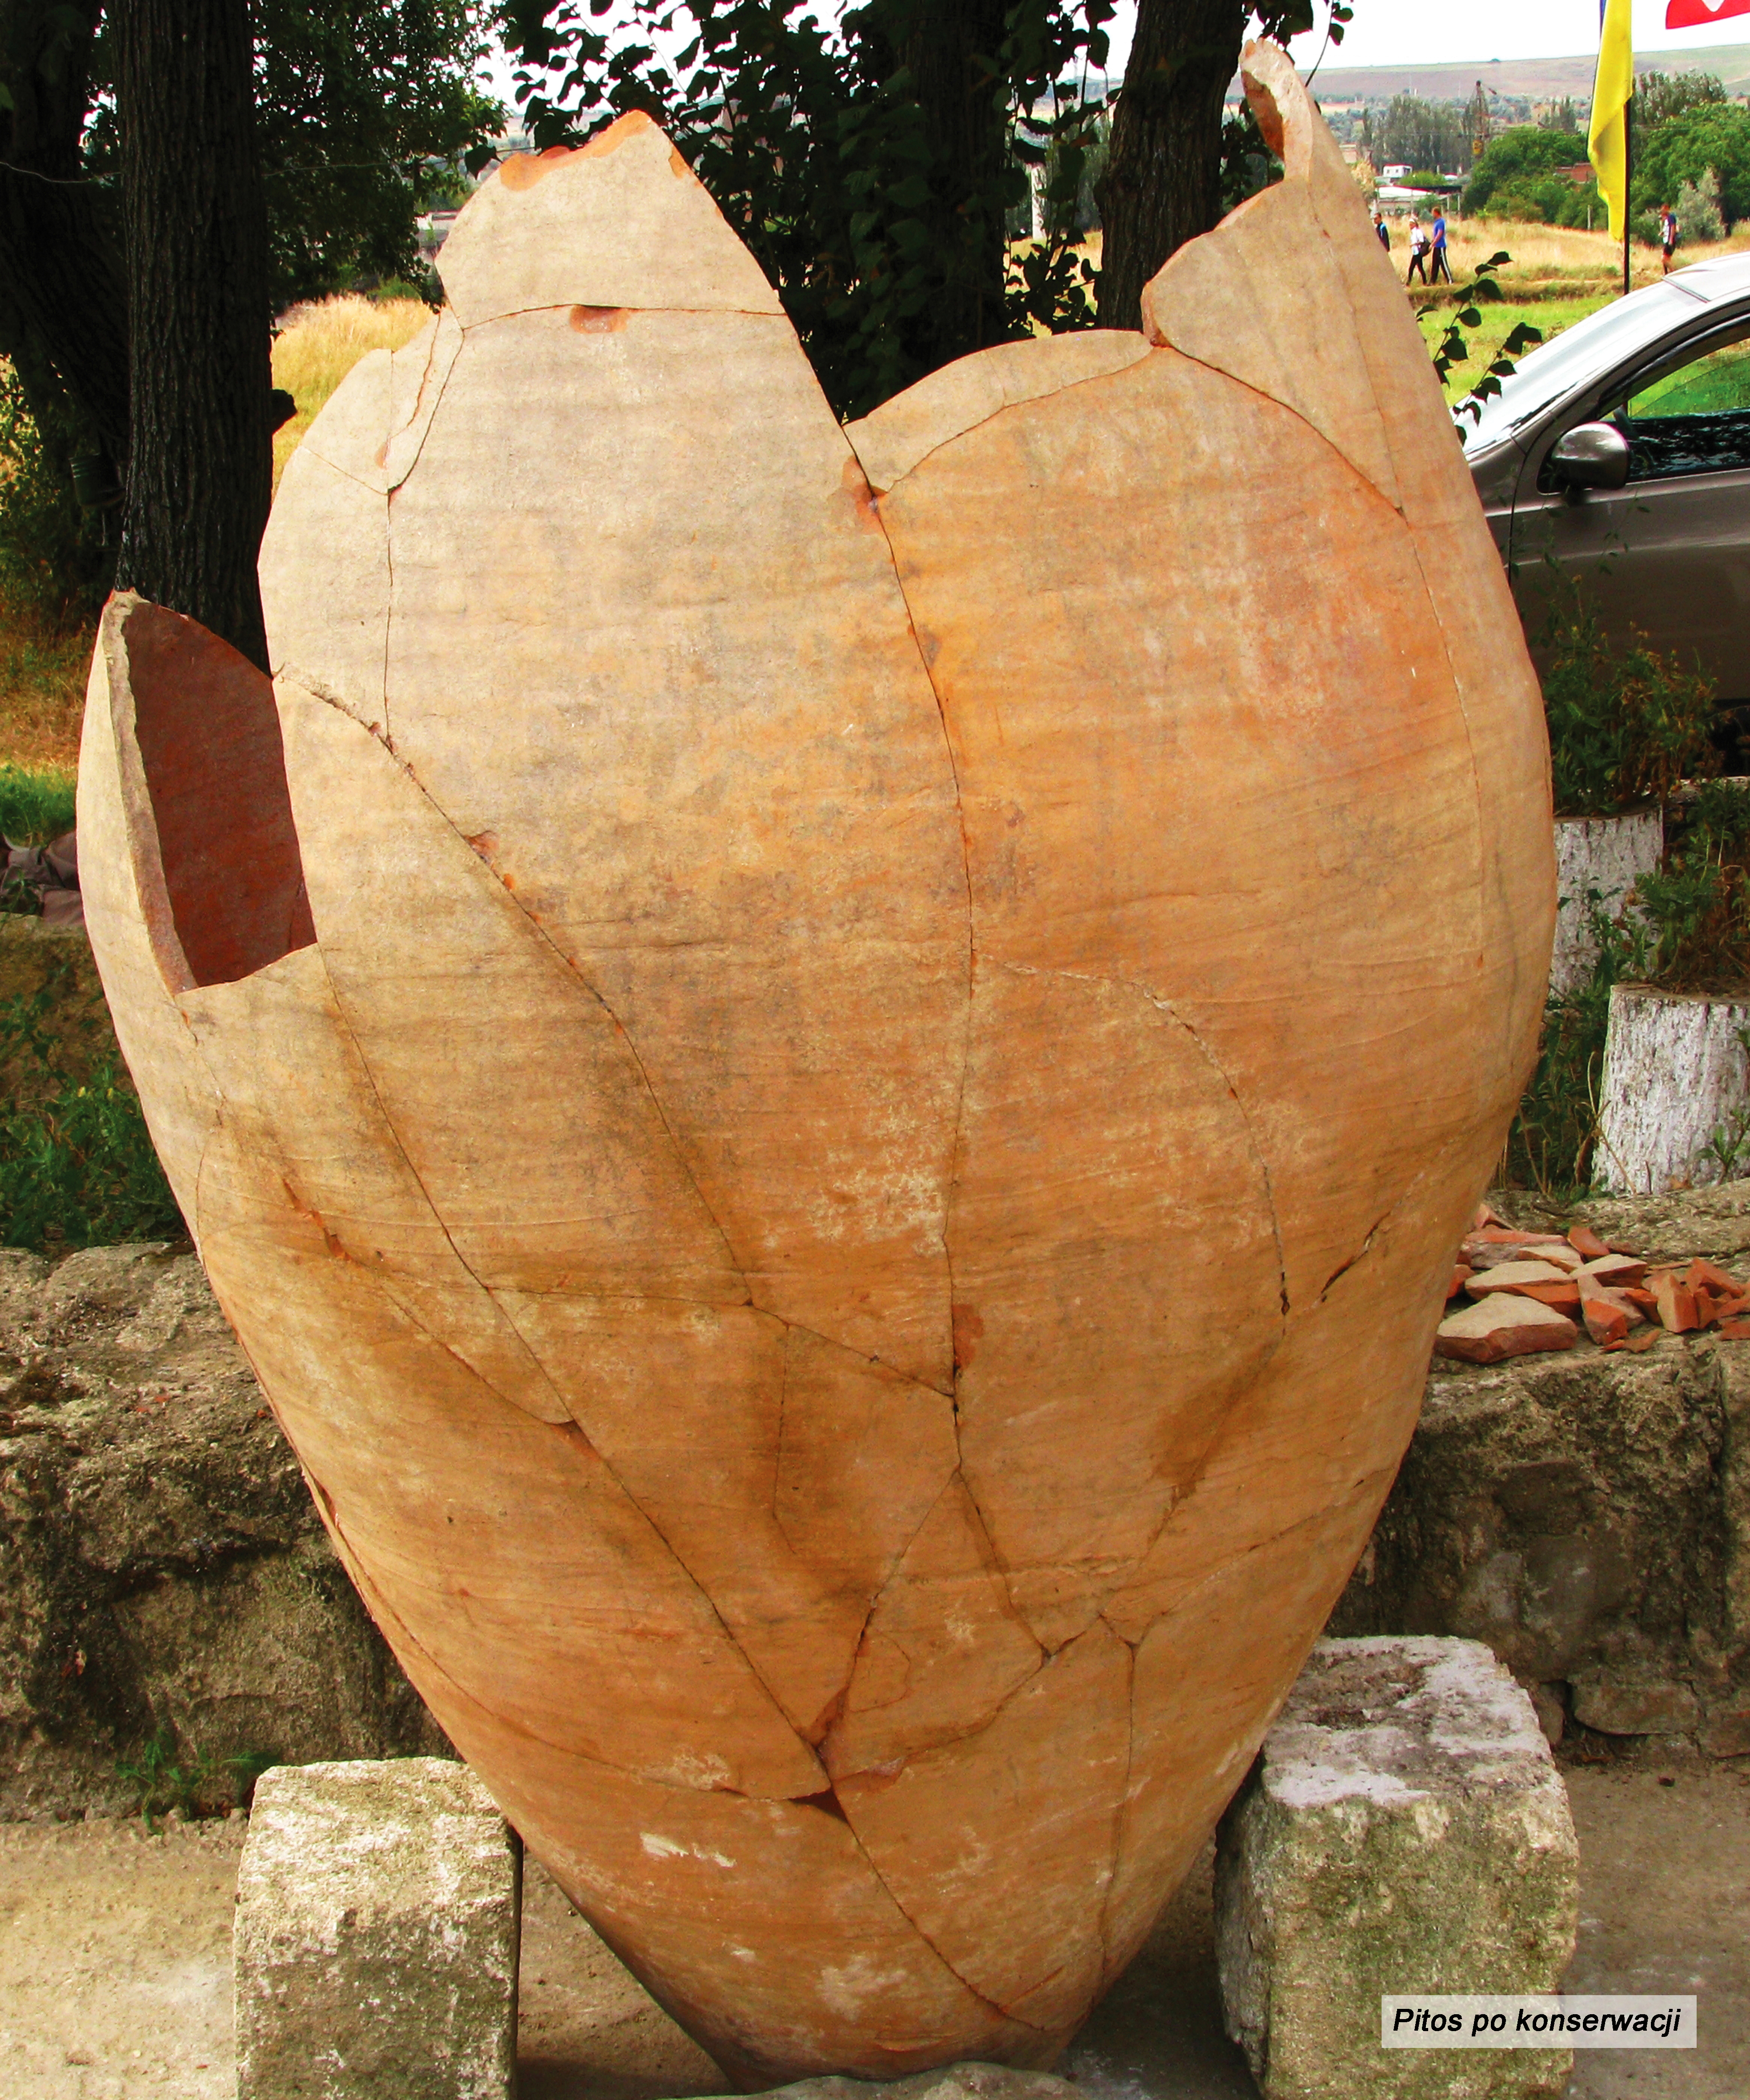 Pithos after reconstruction